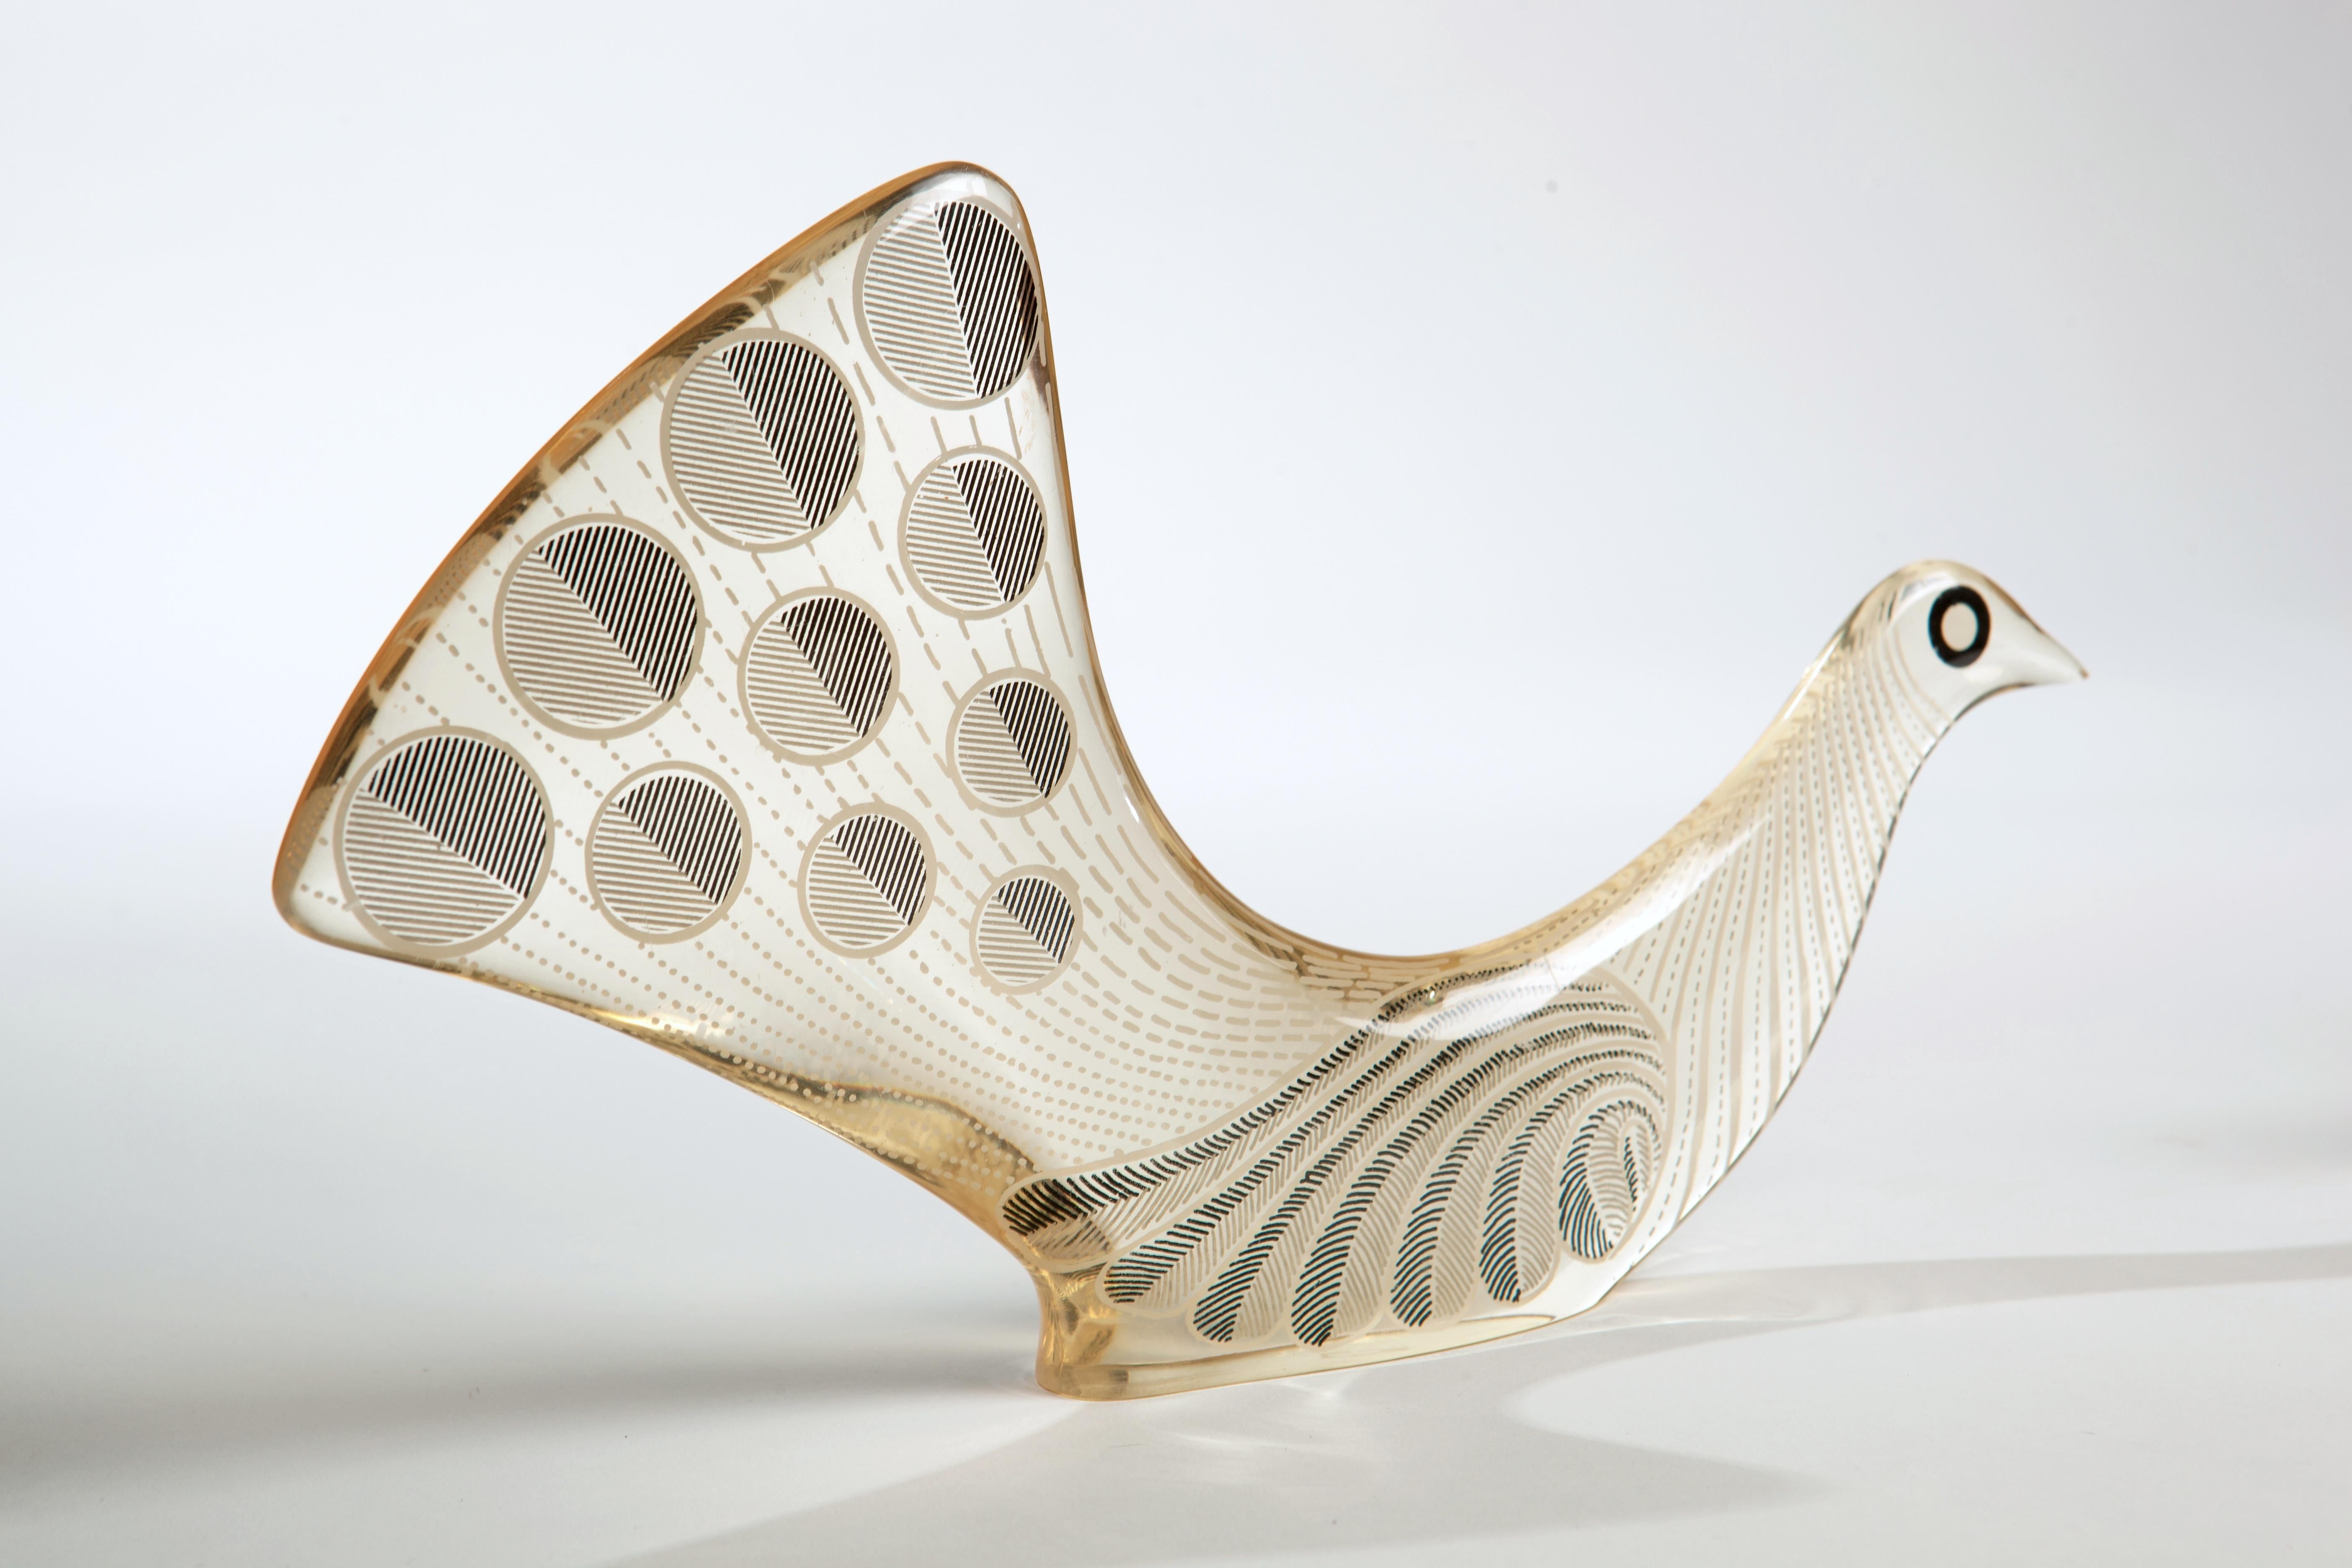 Dramatic and very graphic is this stunning dove or bird sculpture by Abraham Palatnik (1928-2020). A most unusual pattern for his doves. Color varies with room lighting. A second duck sculpture is also available but sold separately.
Palatnik is